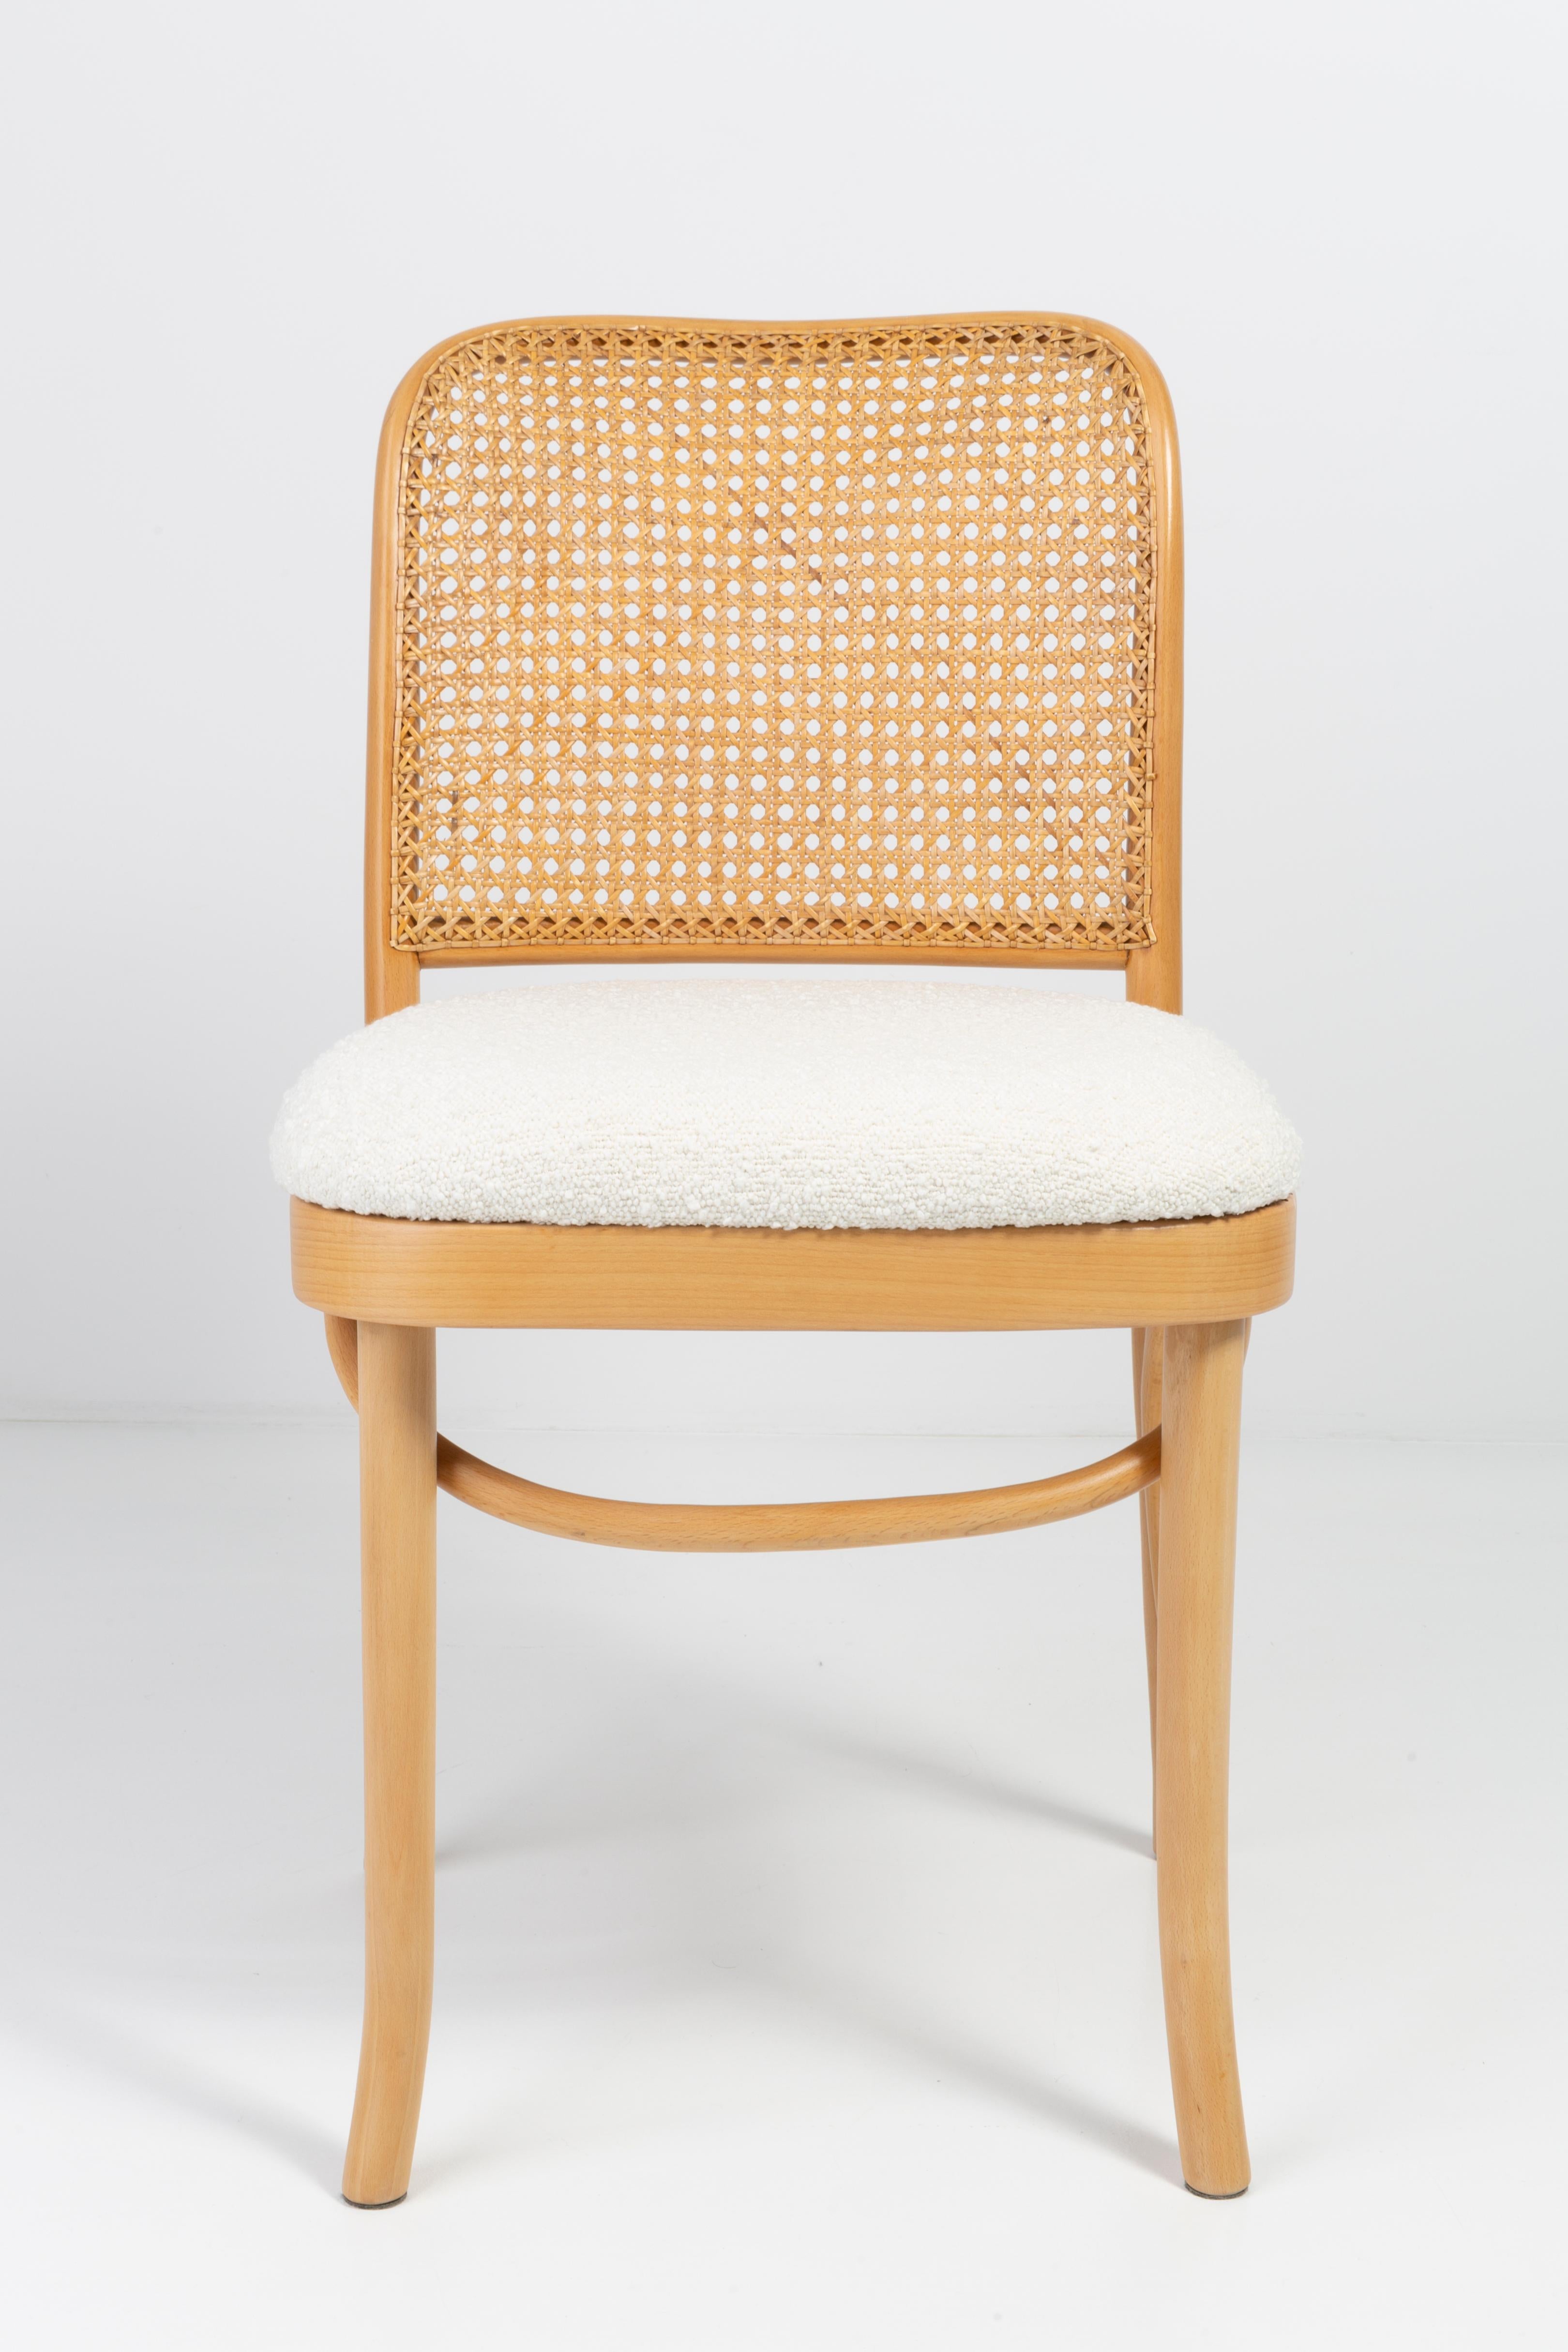 Set of Eight White Boucle Thonet Wood Rattan Chairs, 1960s For Sale 10